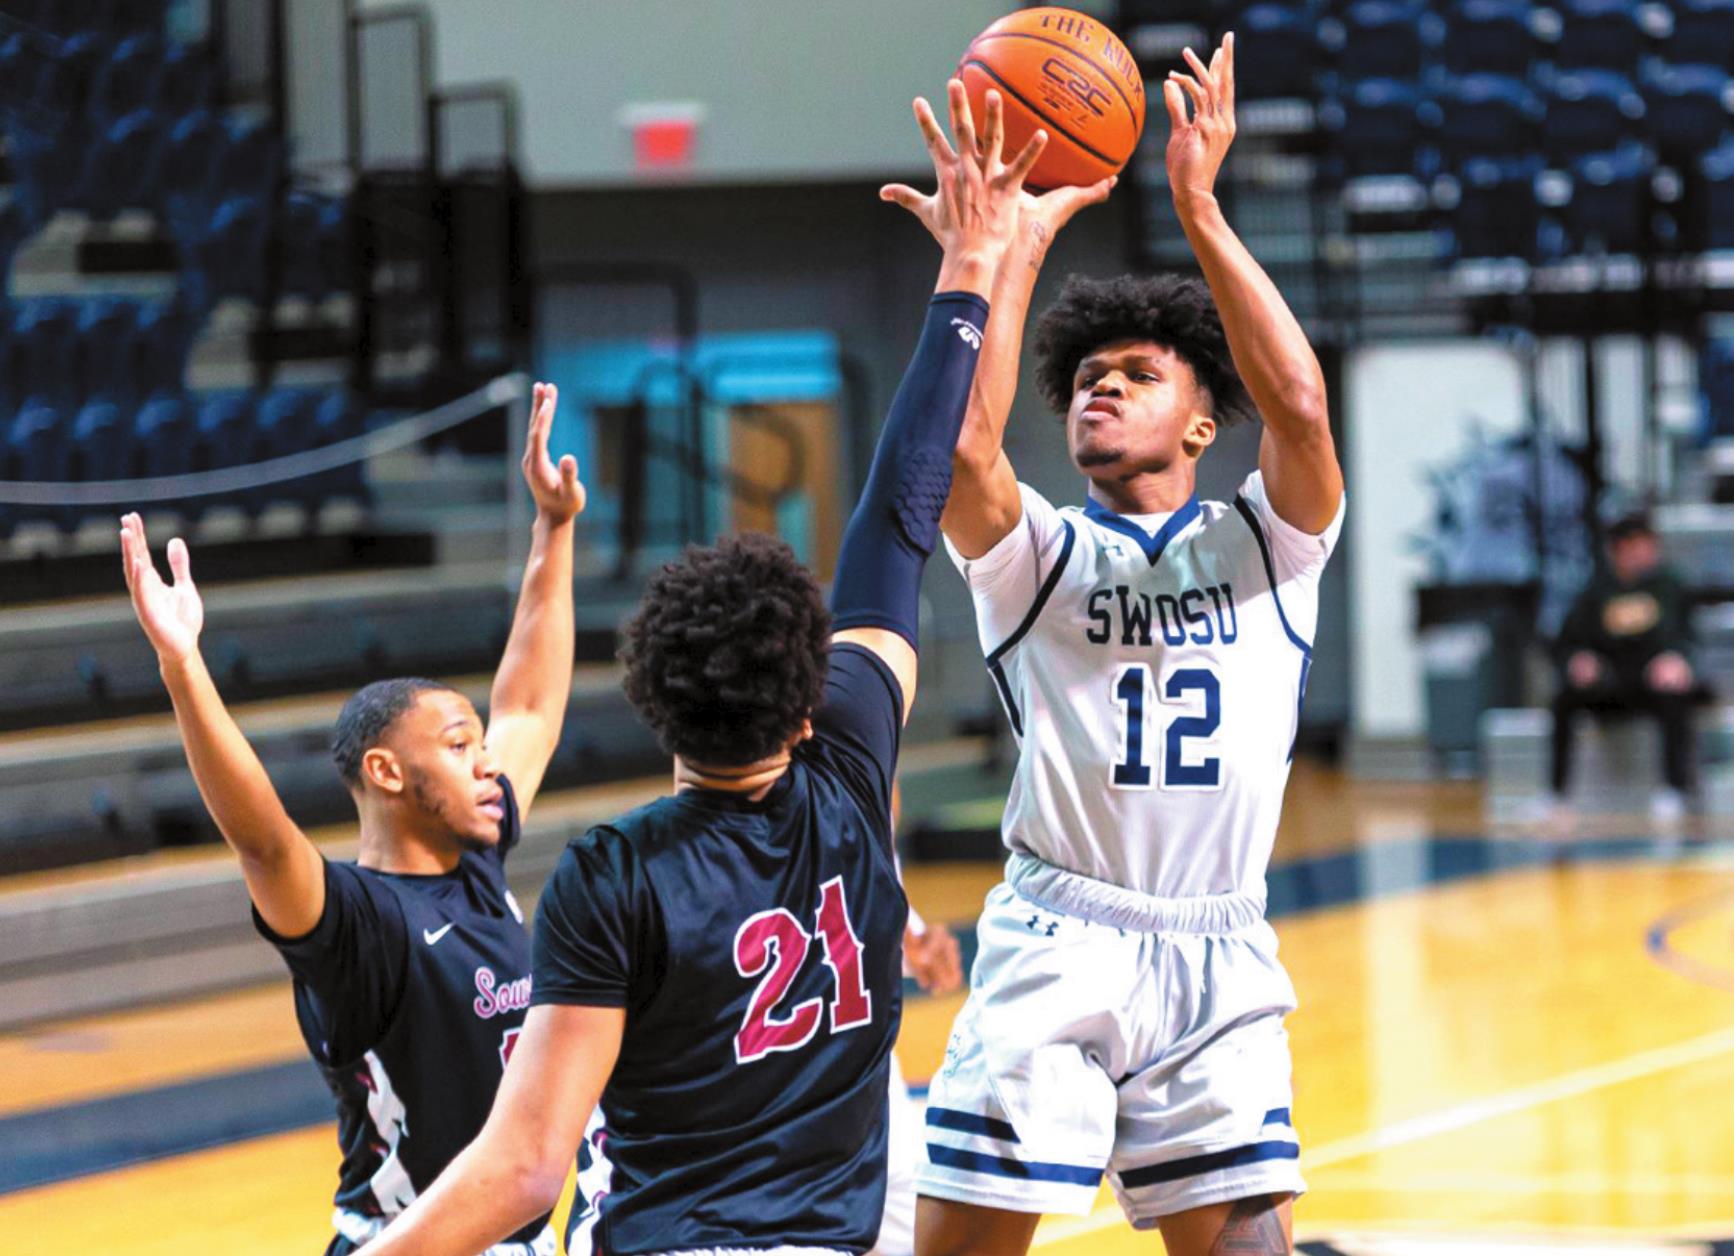 Damion Thornton scored 8 points in SWOSU’s game againt Southern Nazarene Thursday. Provided